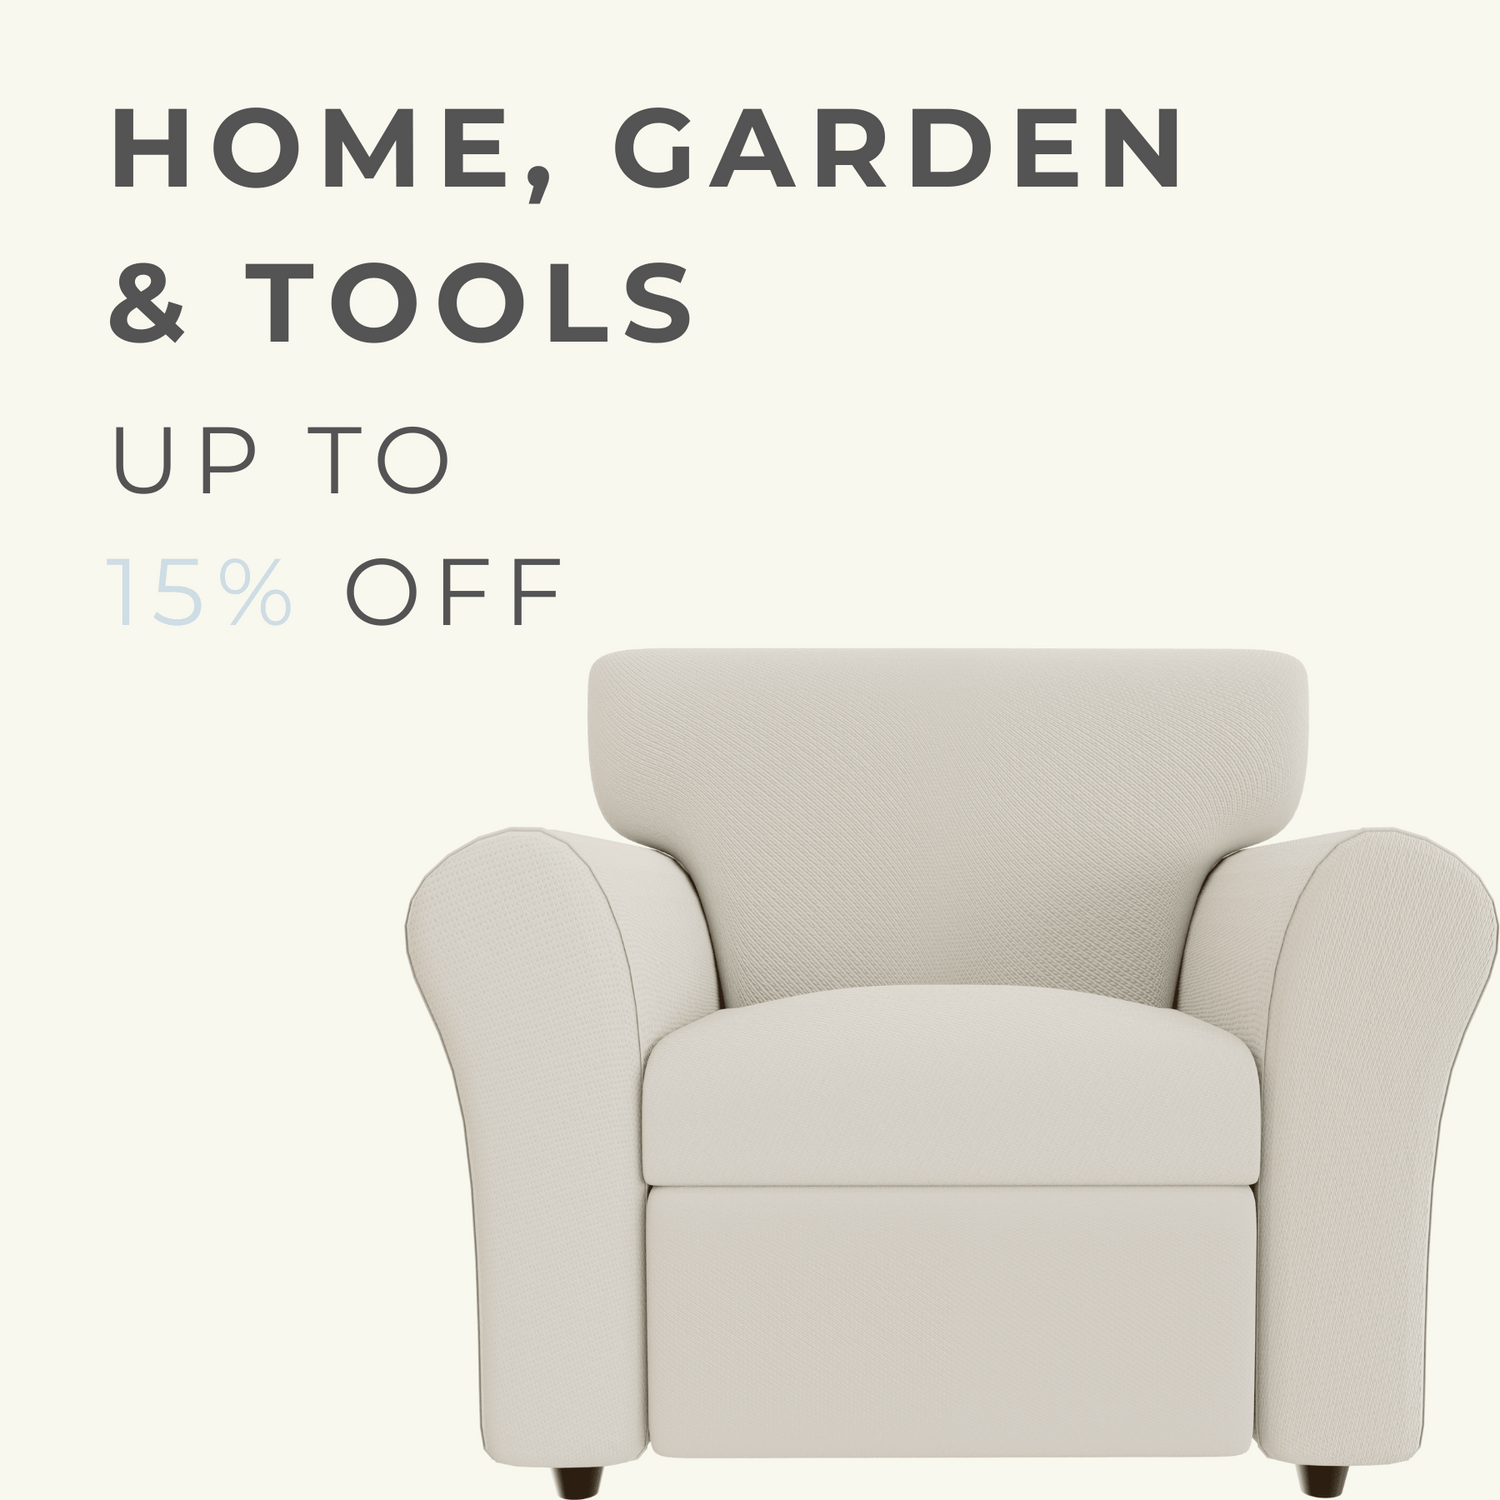 A modern, cozy armchair presented against a neutral background, with the text 'HOME, GARDEN & TOOLS UP TO 15% OFF' displayed above, promoting a discount on home furnishings and tools.